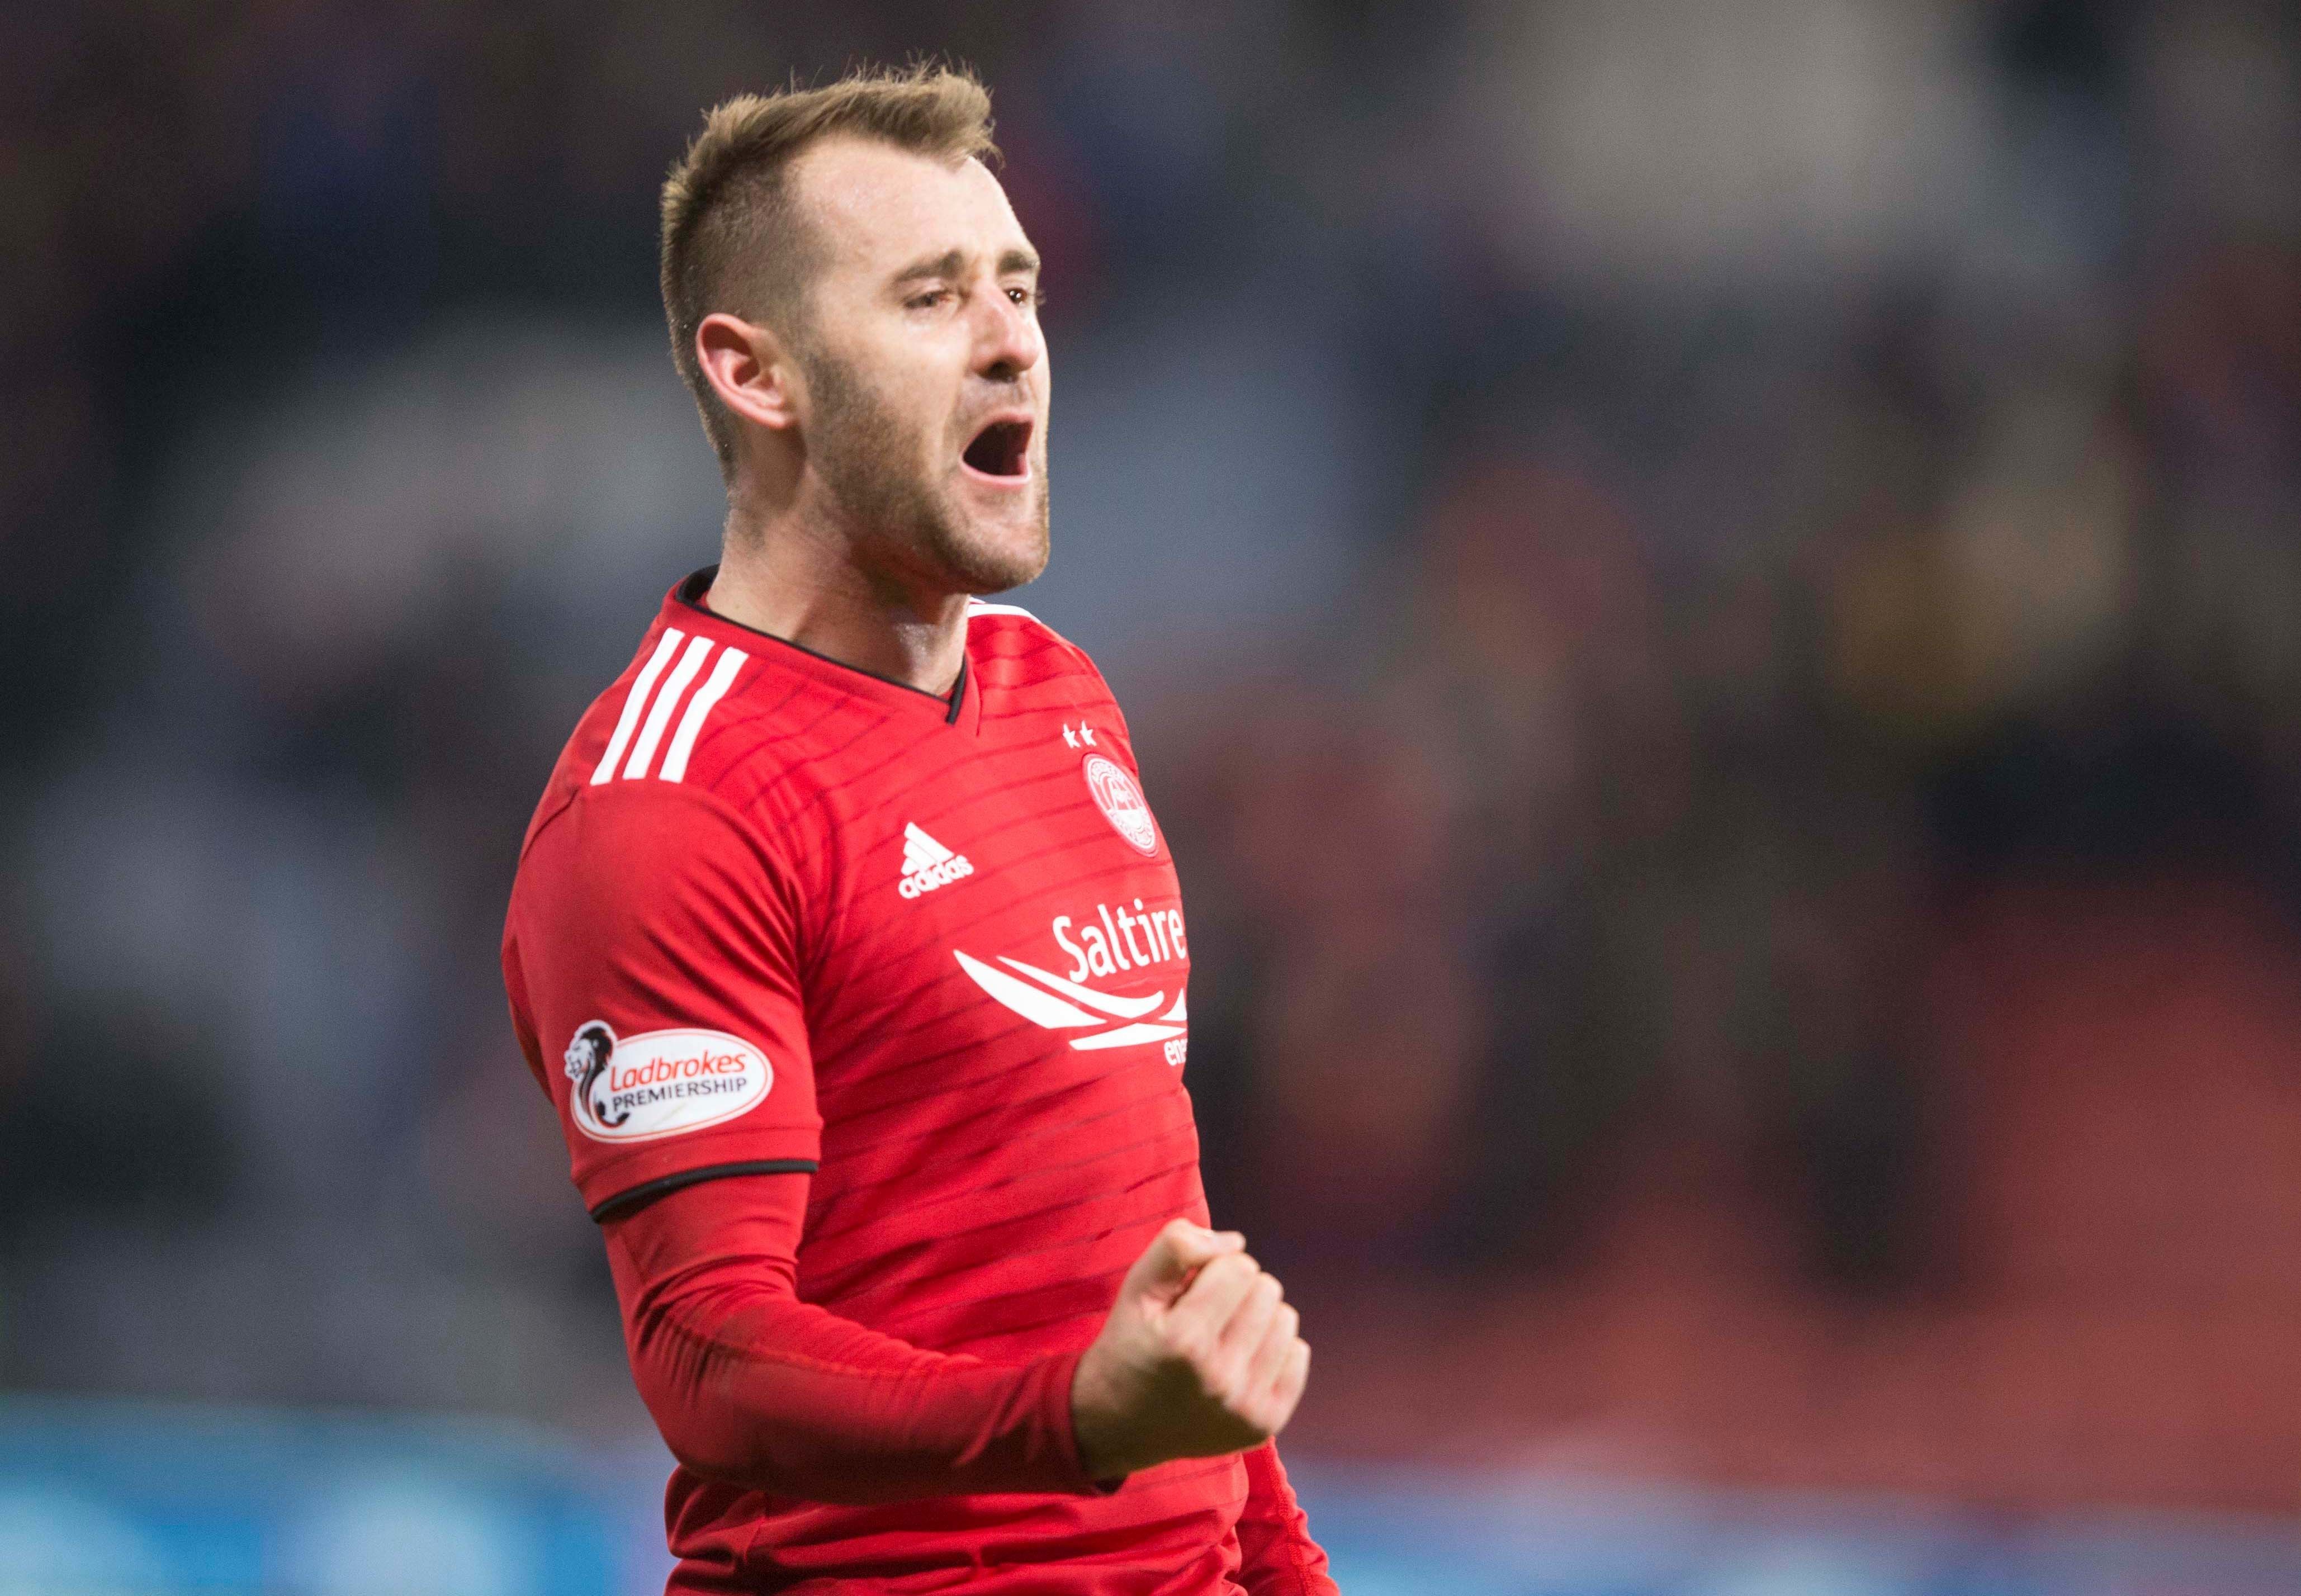 Niall McGinn scored 21 goals for the Dons as a centre forward during the 2012-13 campaign.